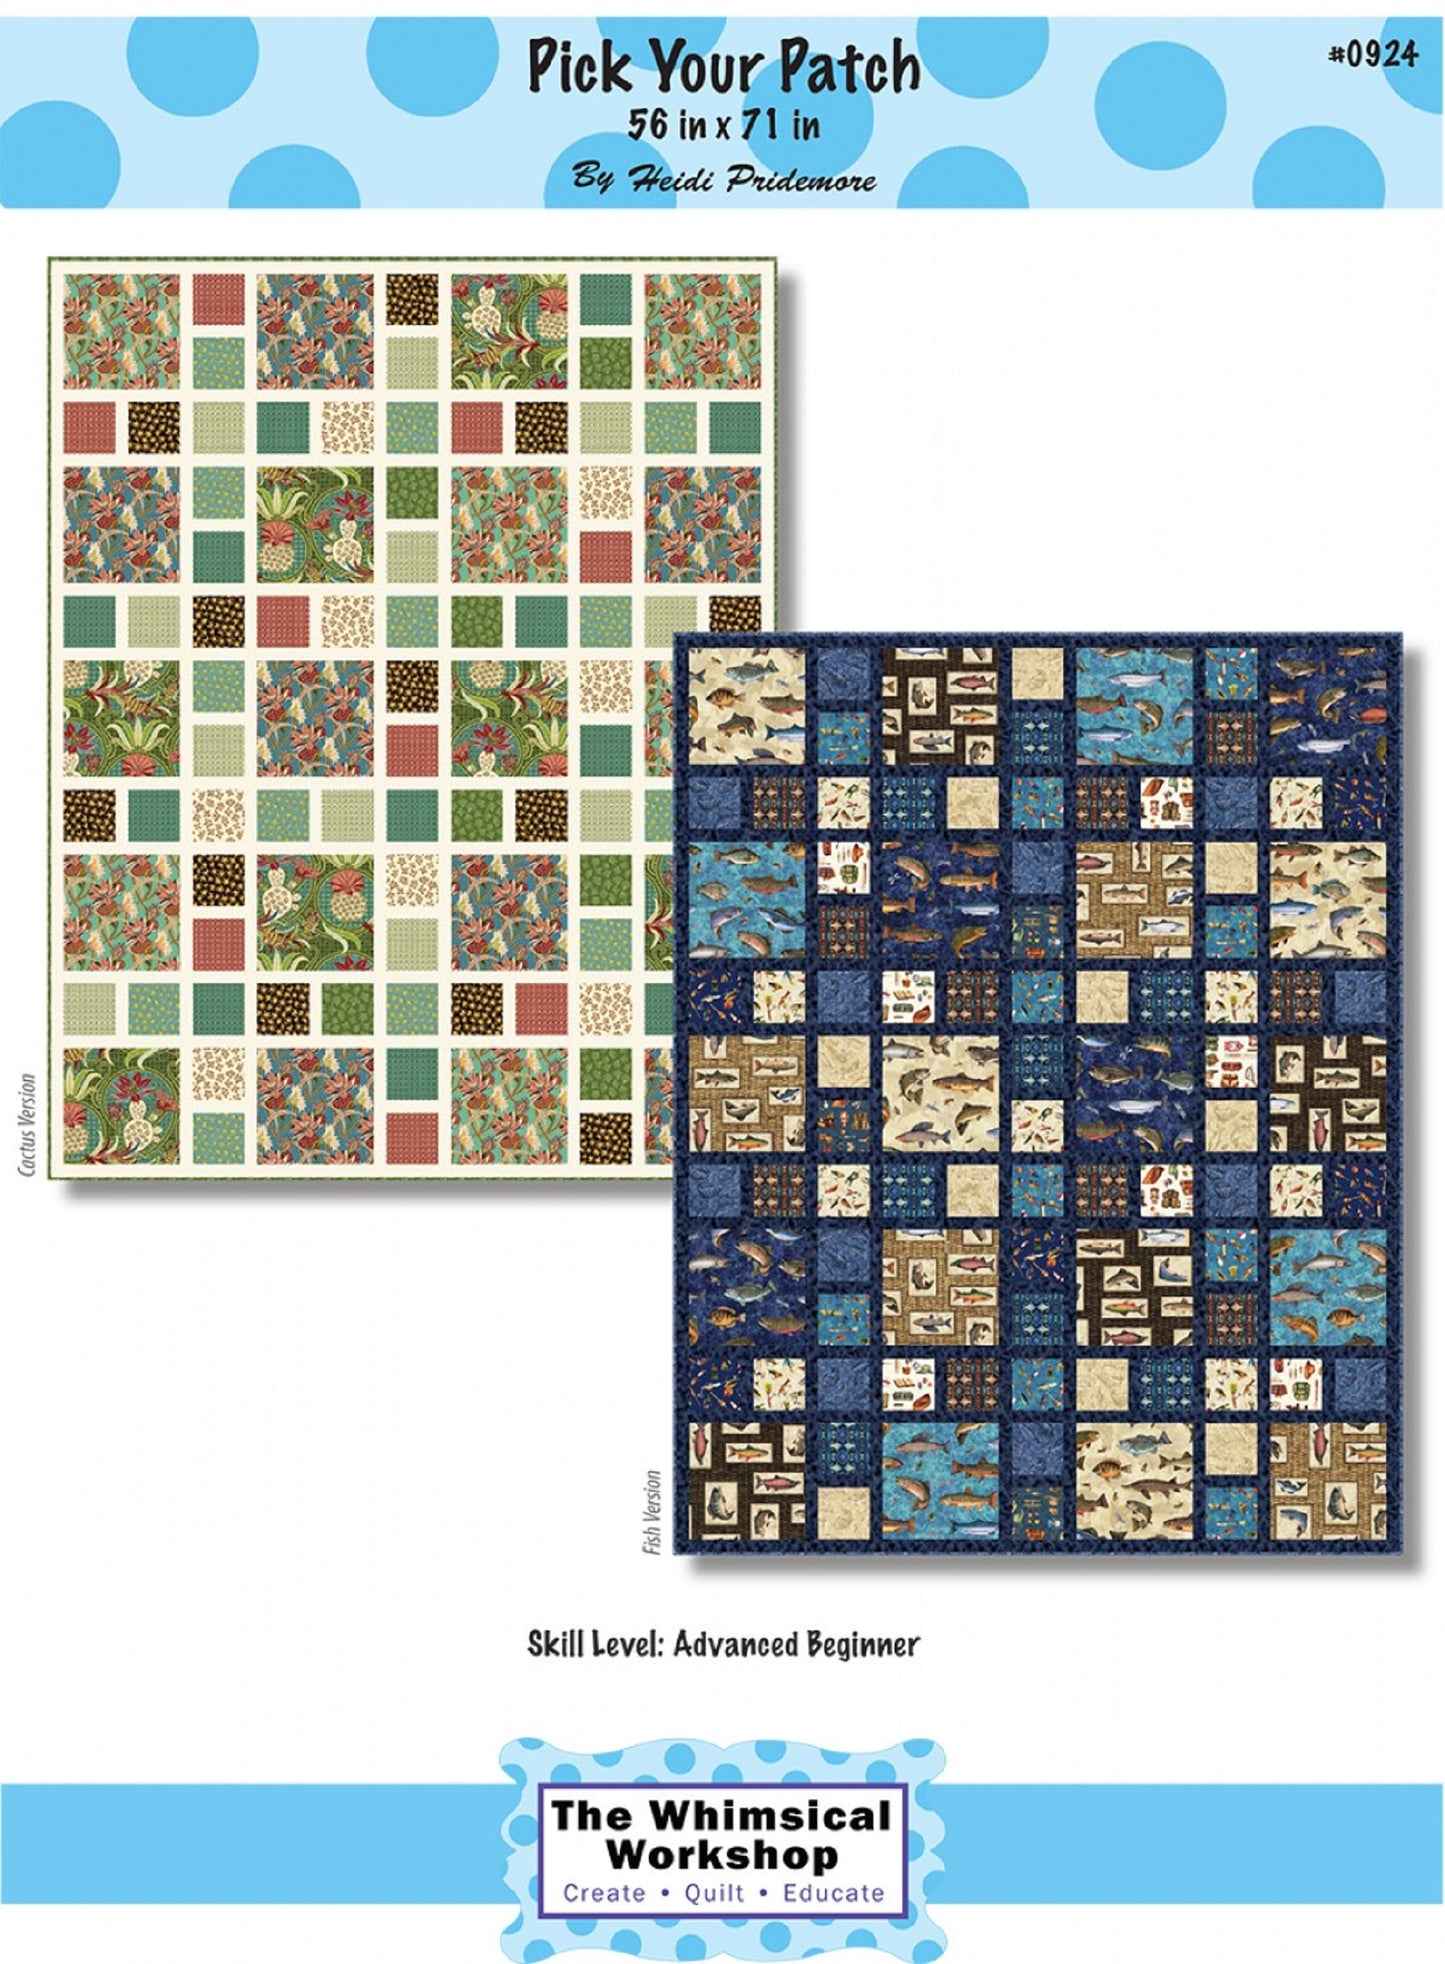 Pick Your Patch Quilt Pattern by Heidi Pridemore